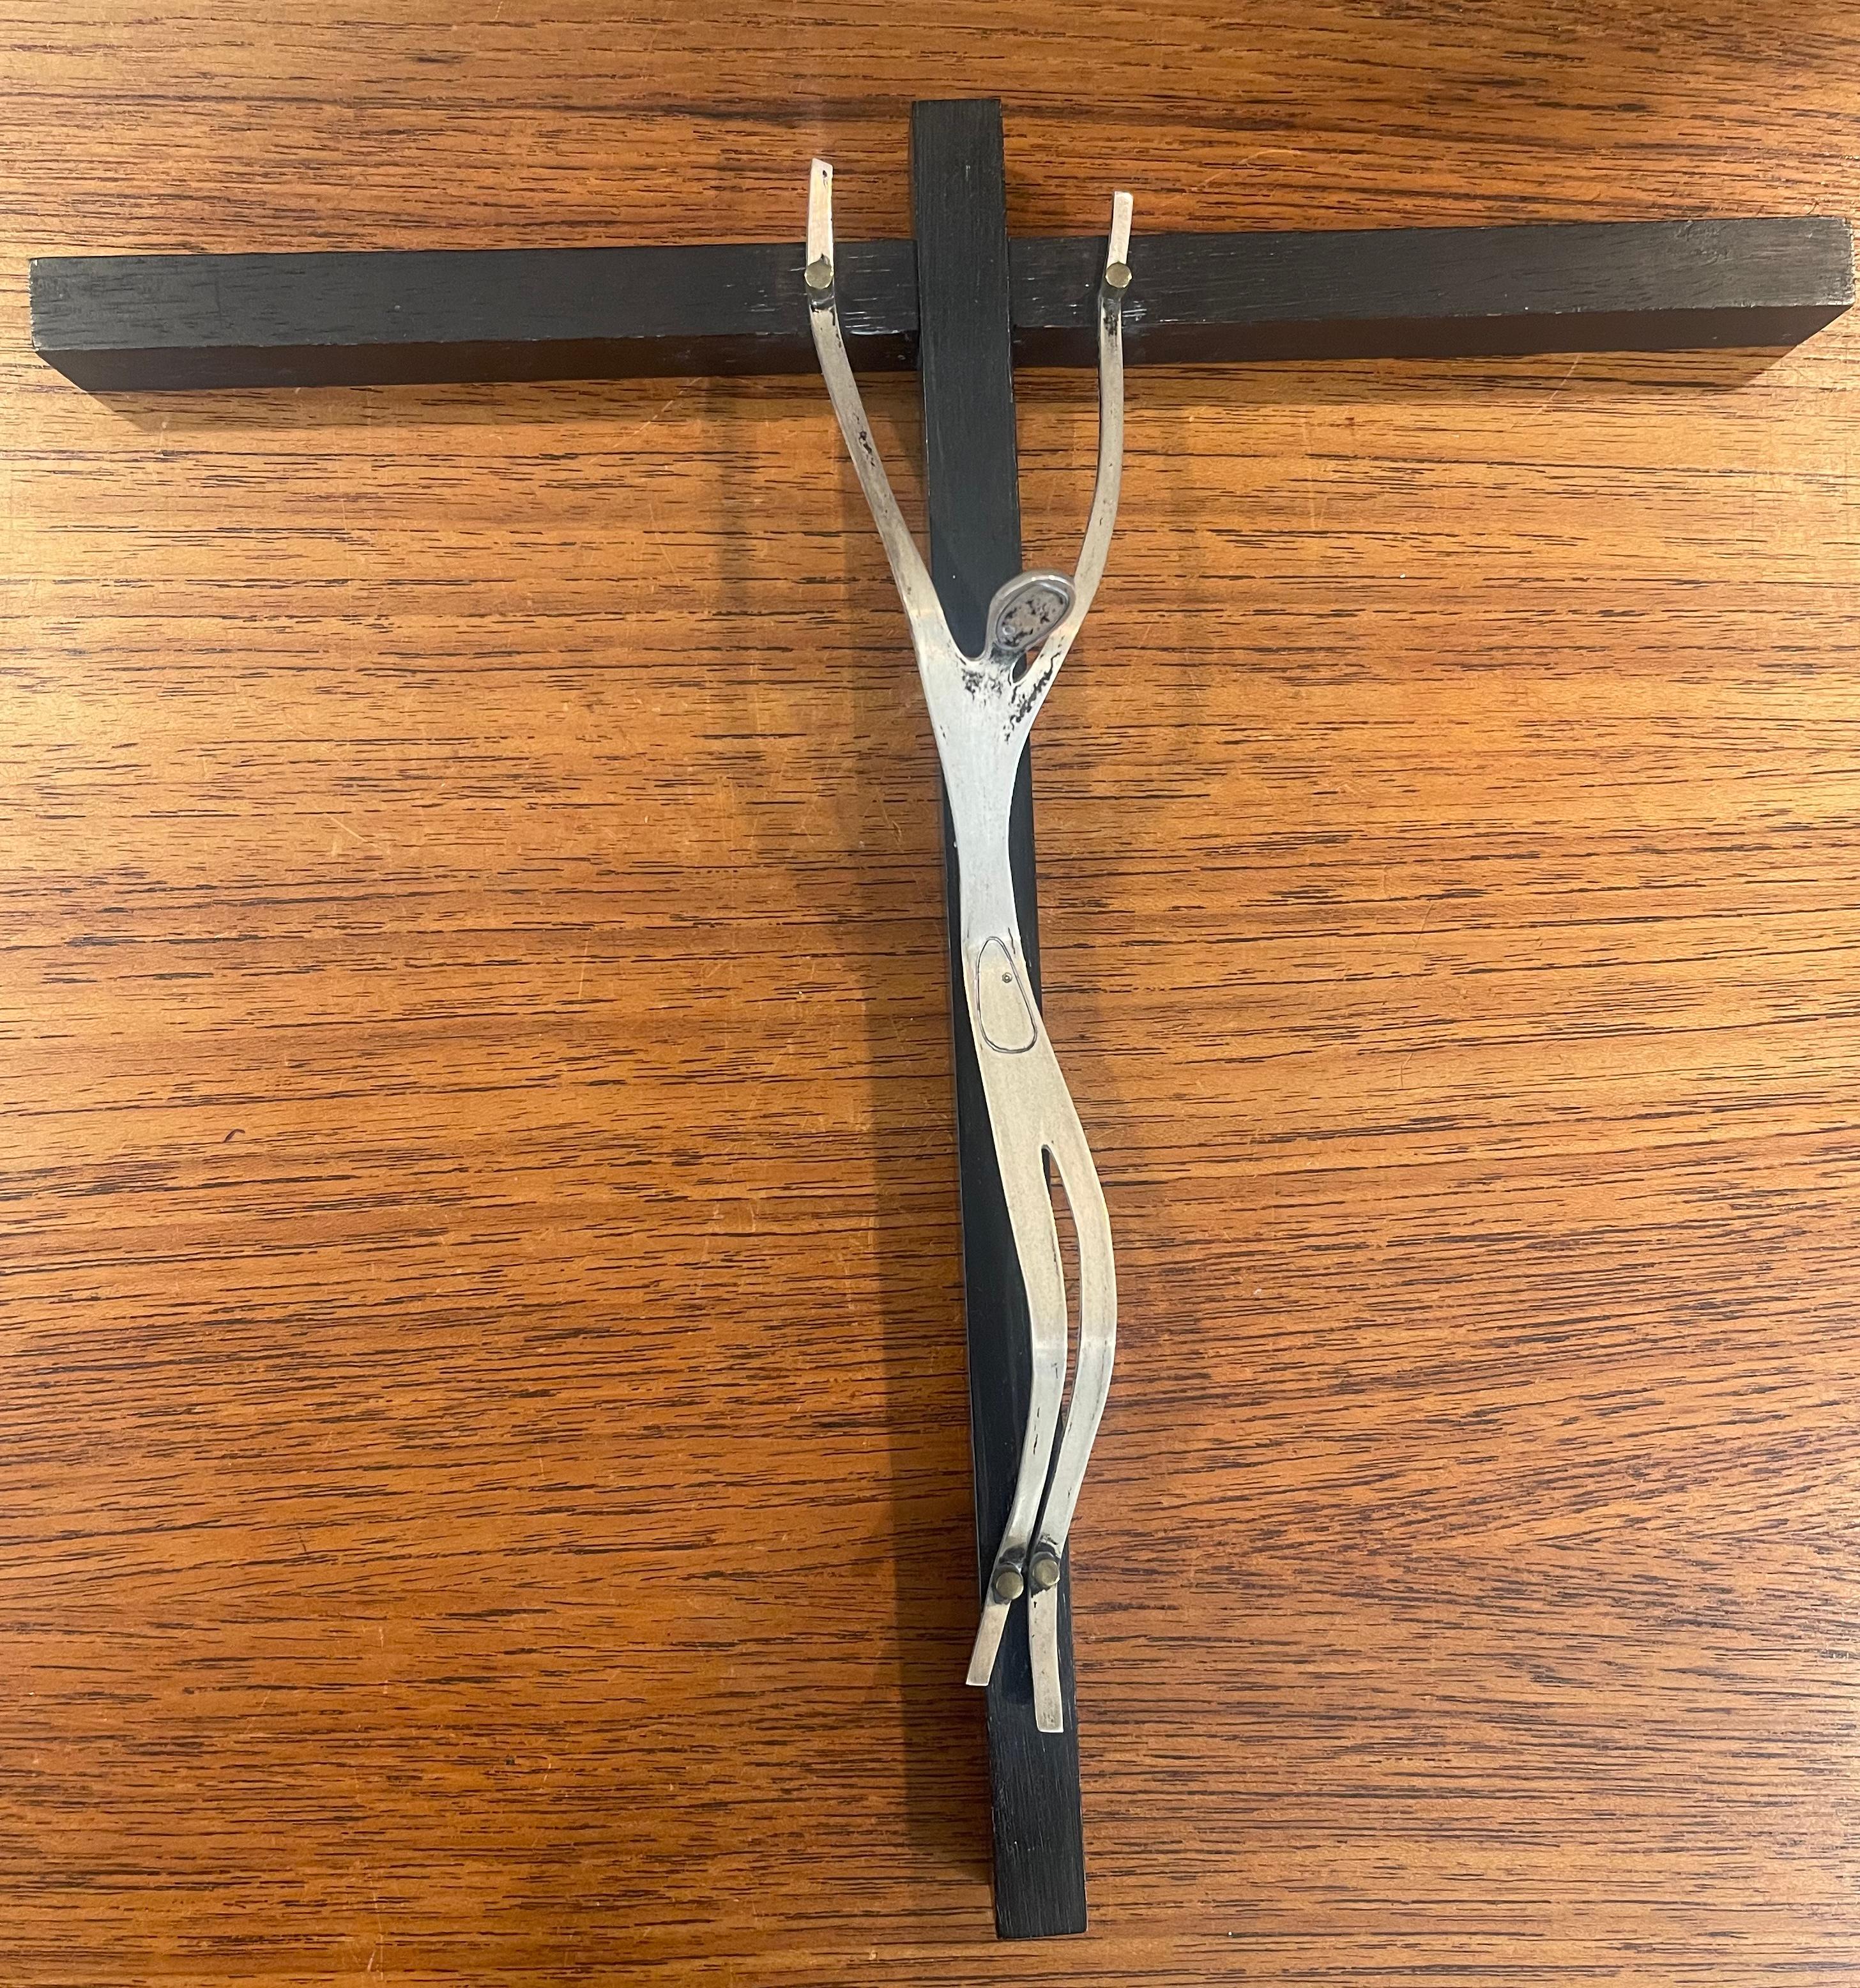 A very nice modernist ebonized wood and mixed metals (sterling, brass & copper) crucifix / cross by Talleres Monasticos - workshop of the Benedictine monks of Cuernavaca, Mexico, circa 1960s. The piece measures 10.25